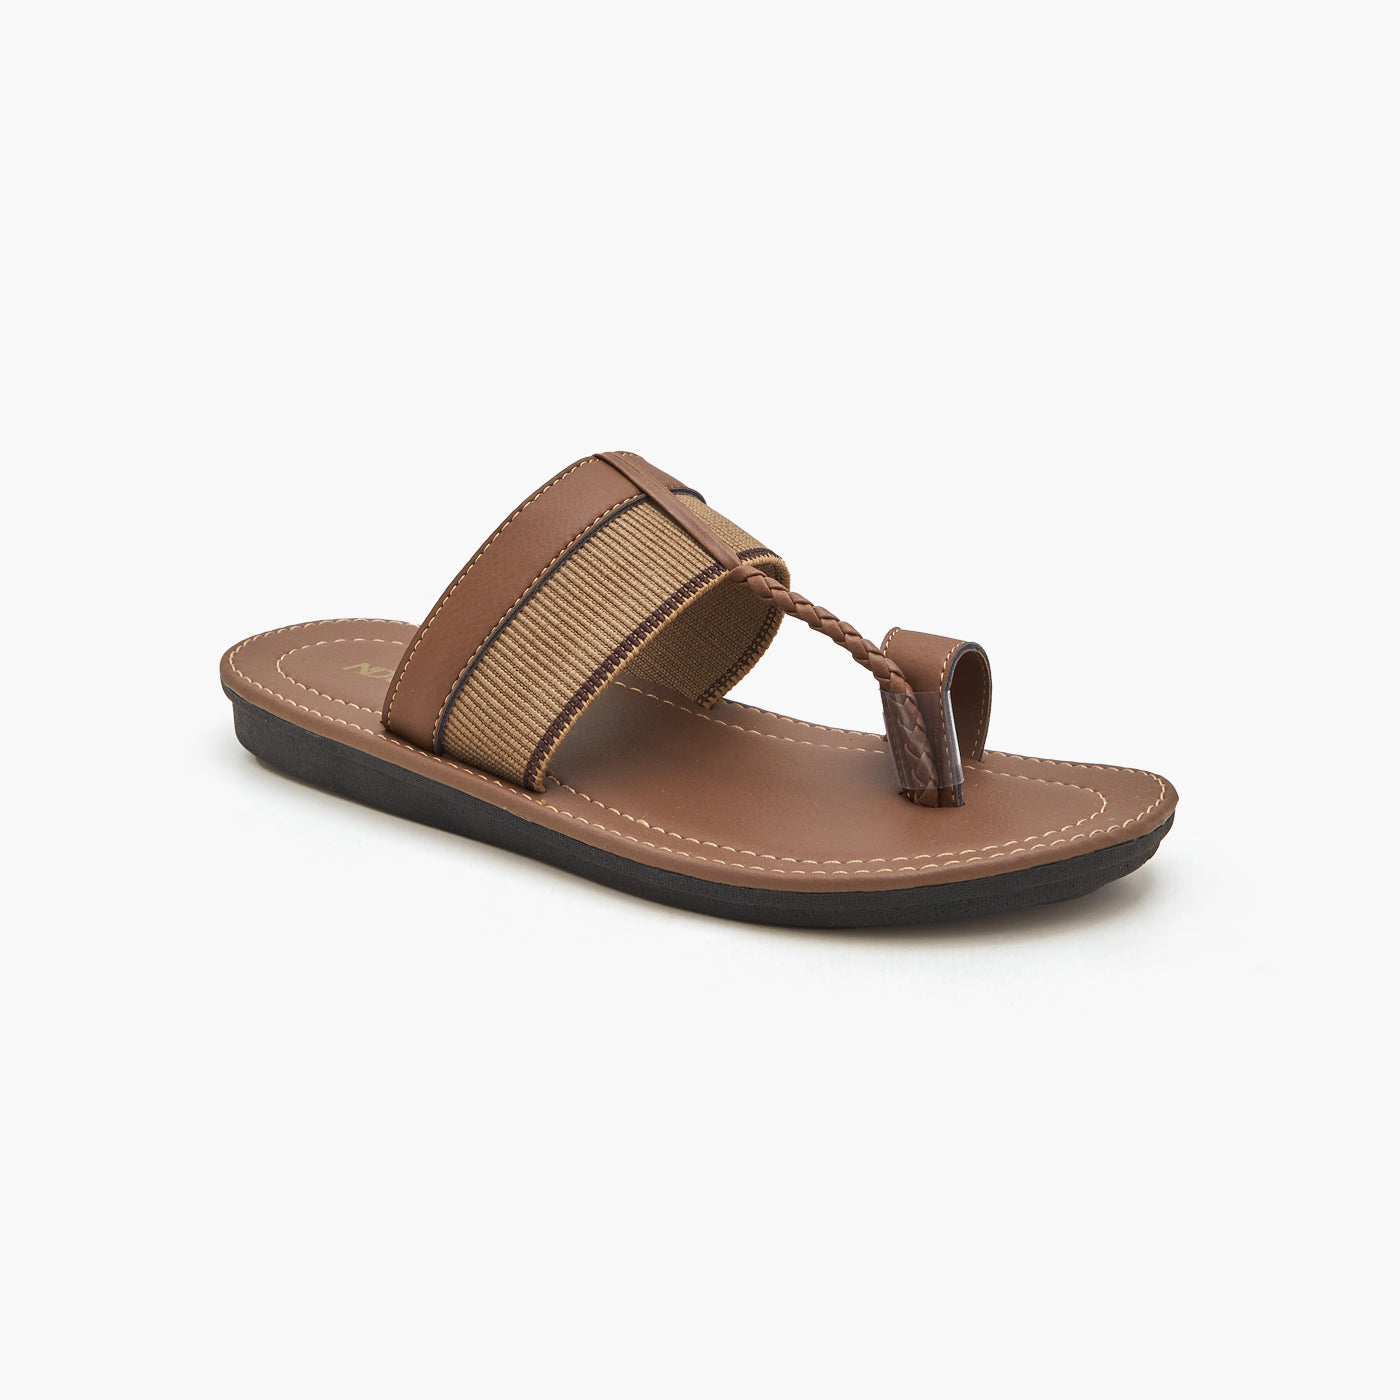 Everyday Chappals for Men